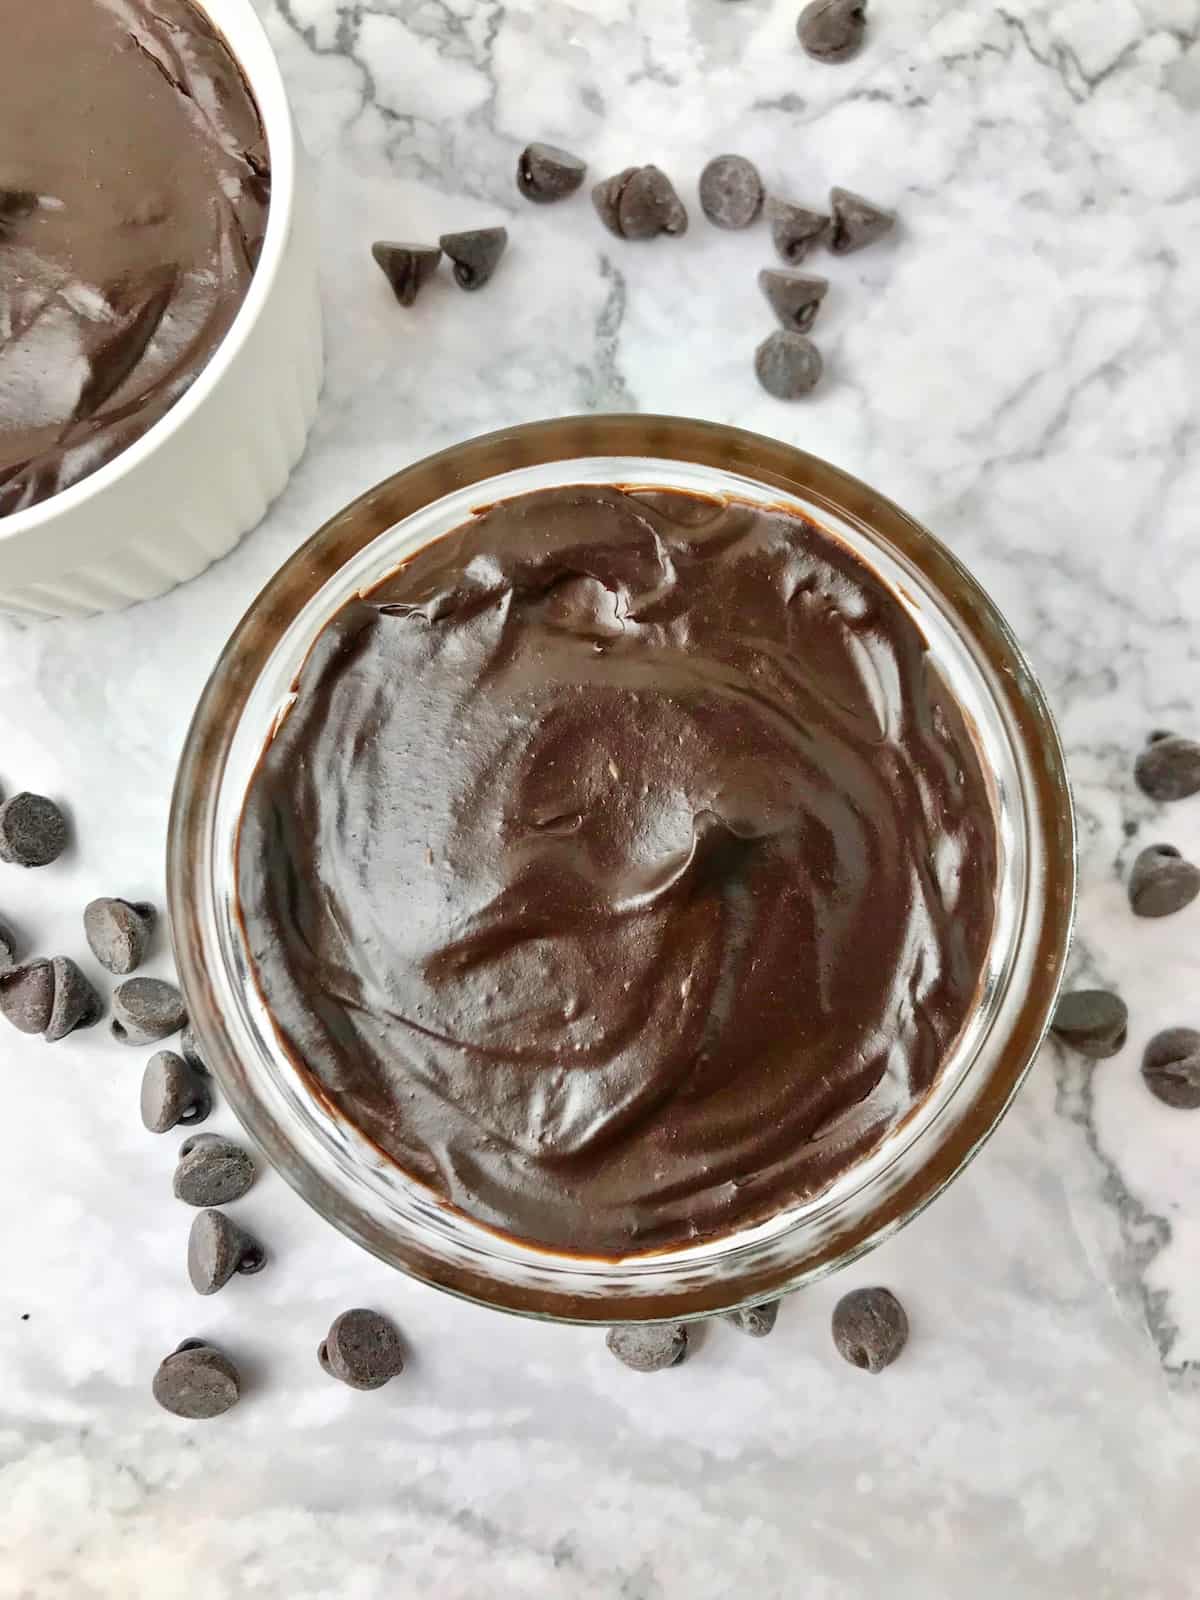 A bowl of avocado chocolate pudding next to some chocolate chips.